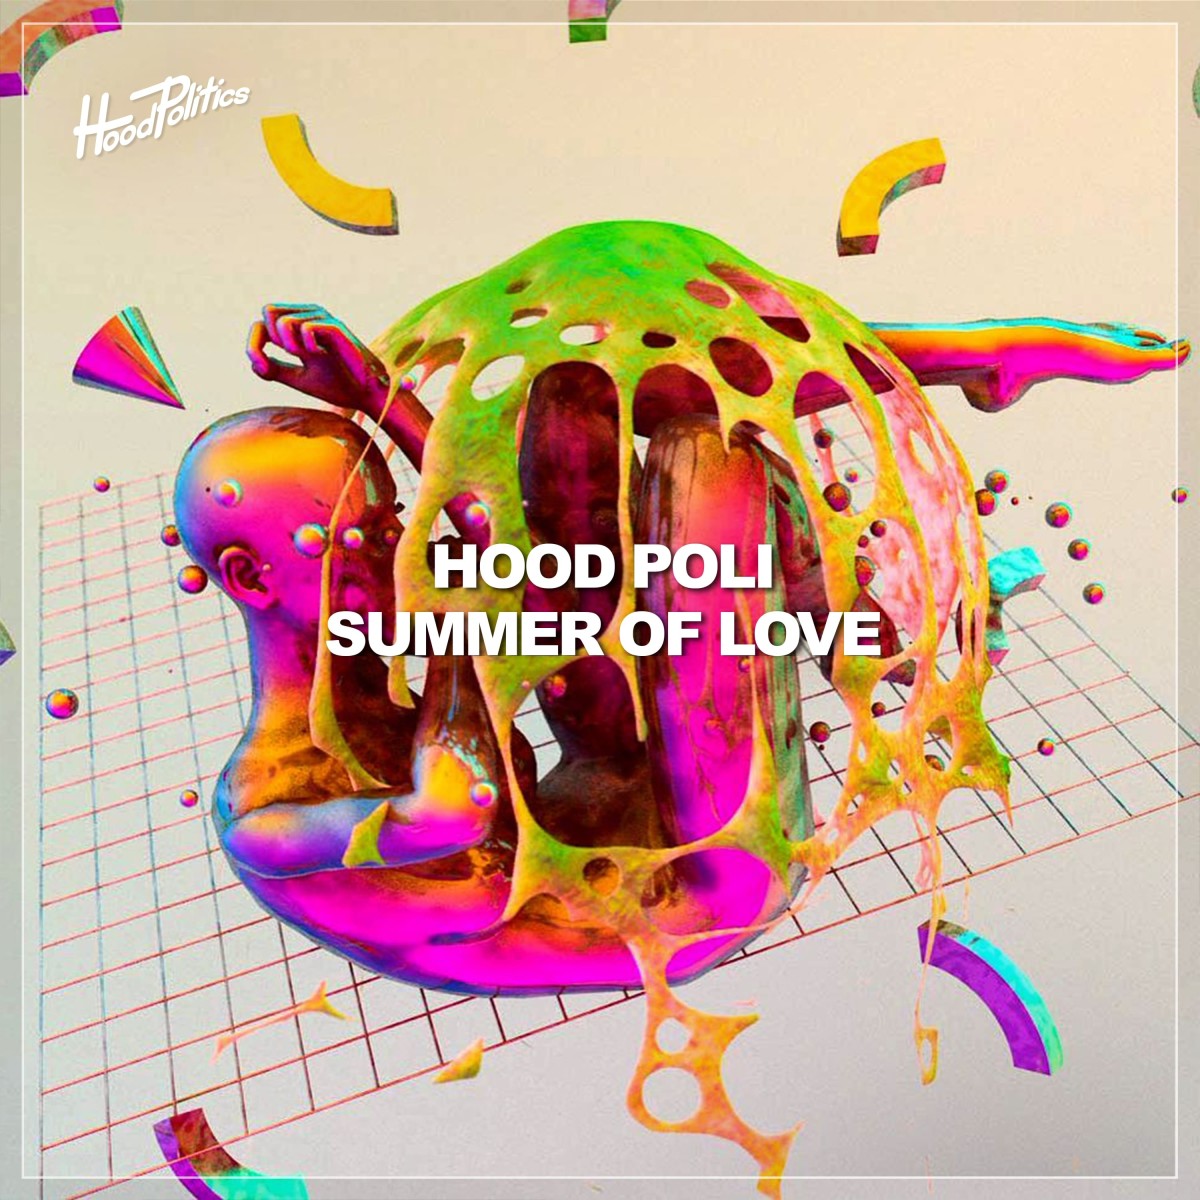 Artwork for the "Hood Poli Summer Of Love" compilation from Hood Politics Records.